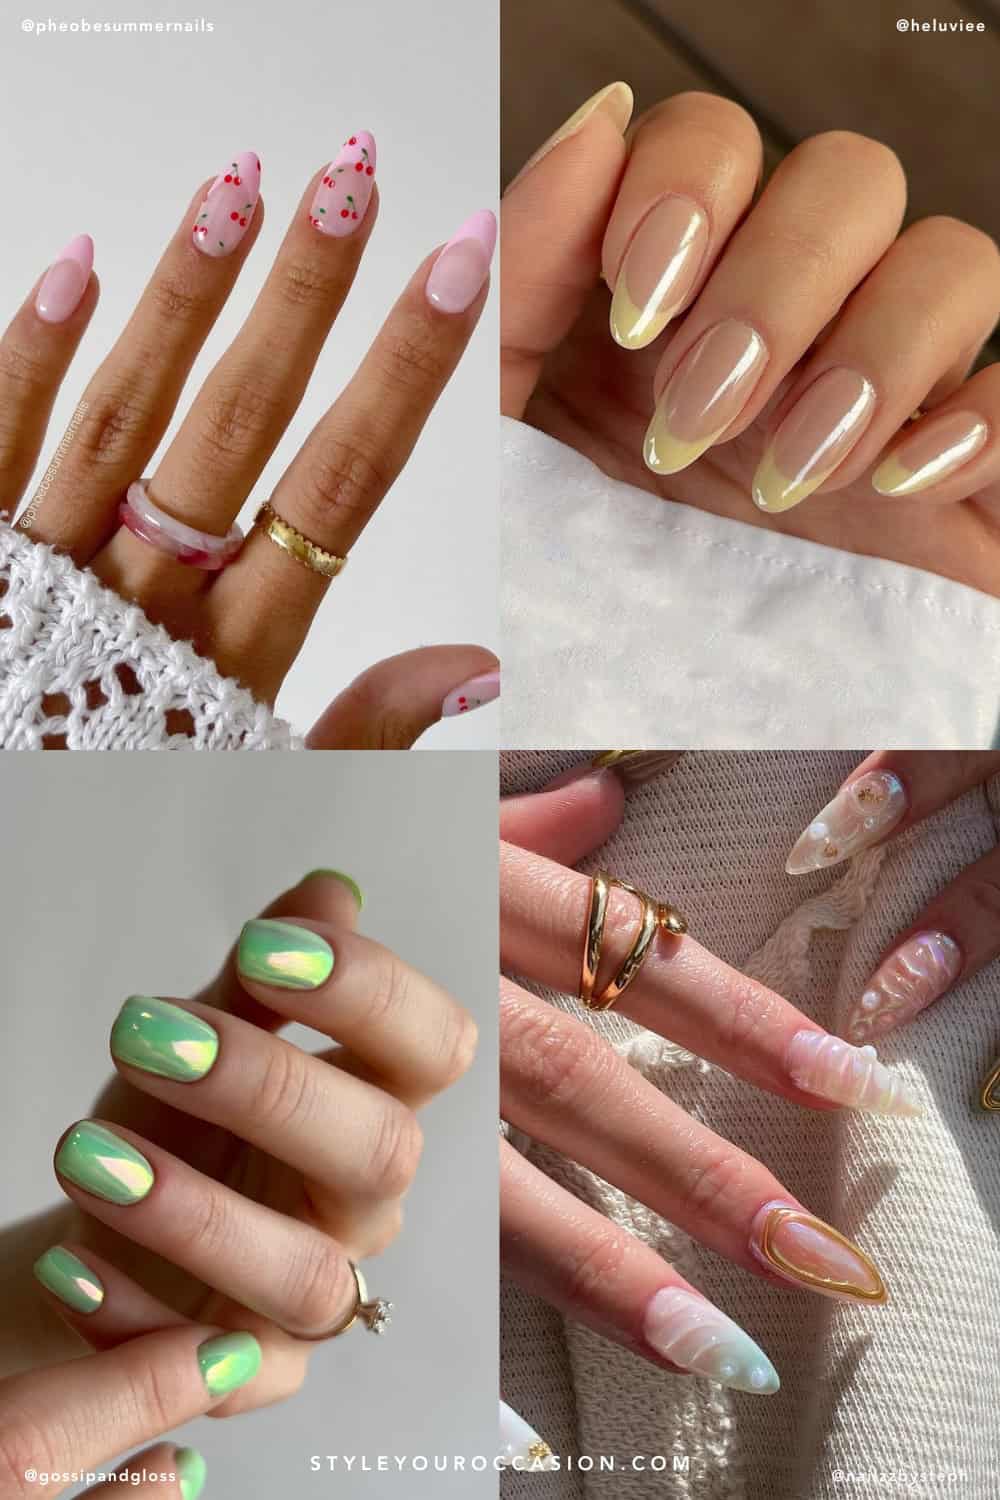 collage of four hands with summer nail trend designs including butter yellow, green chrome, cherry nail art, and 3d mermaid art